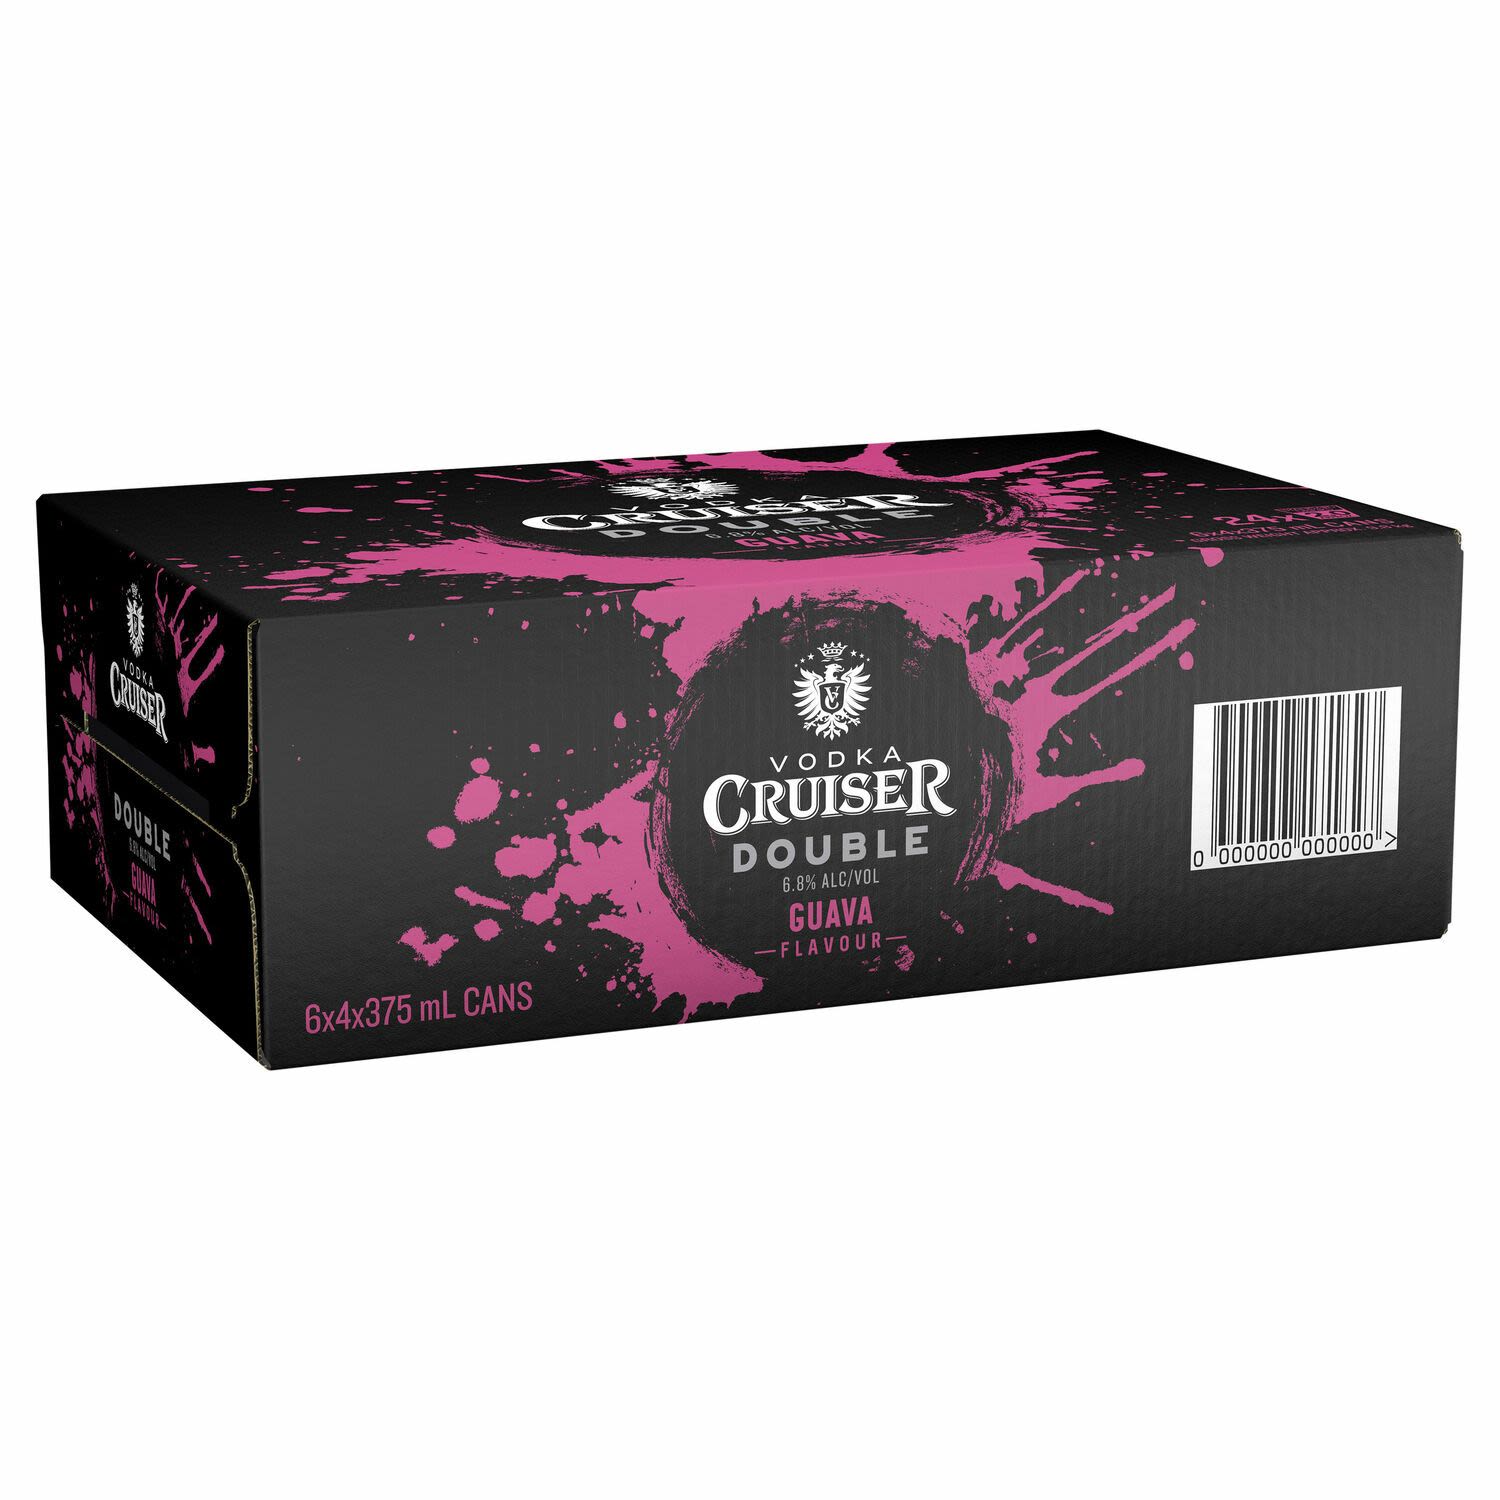 Vodka Cruiser Double Black Guava 6.8% Can 375mL 24 Pack